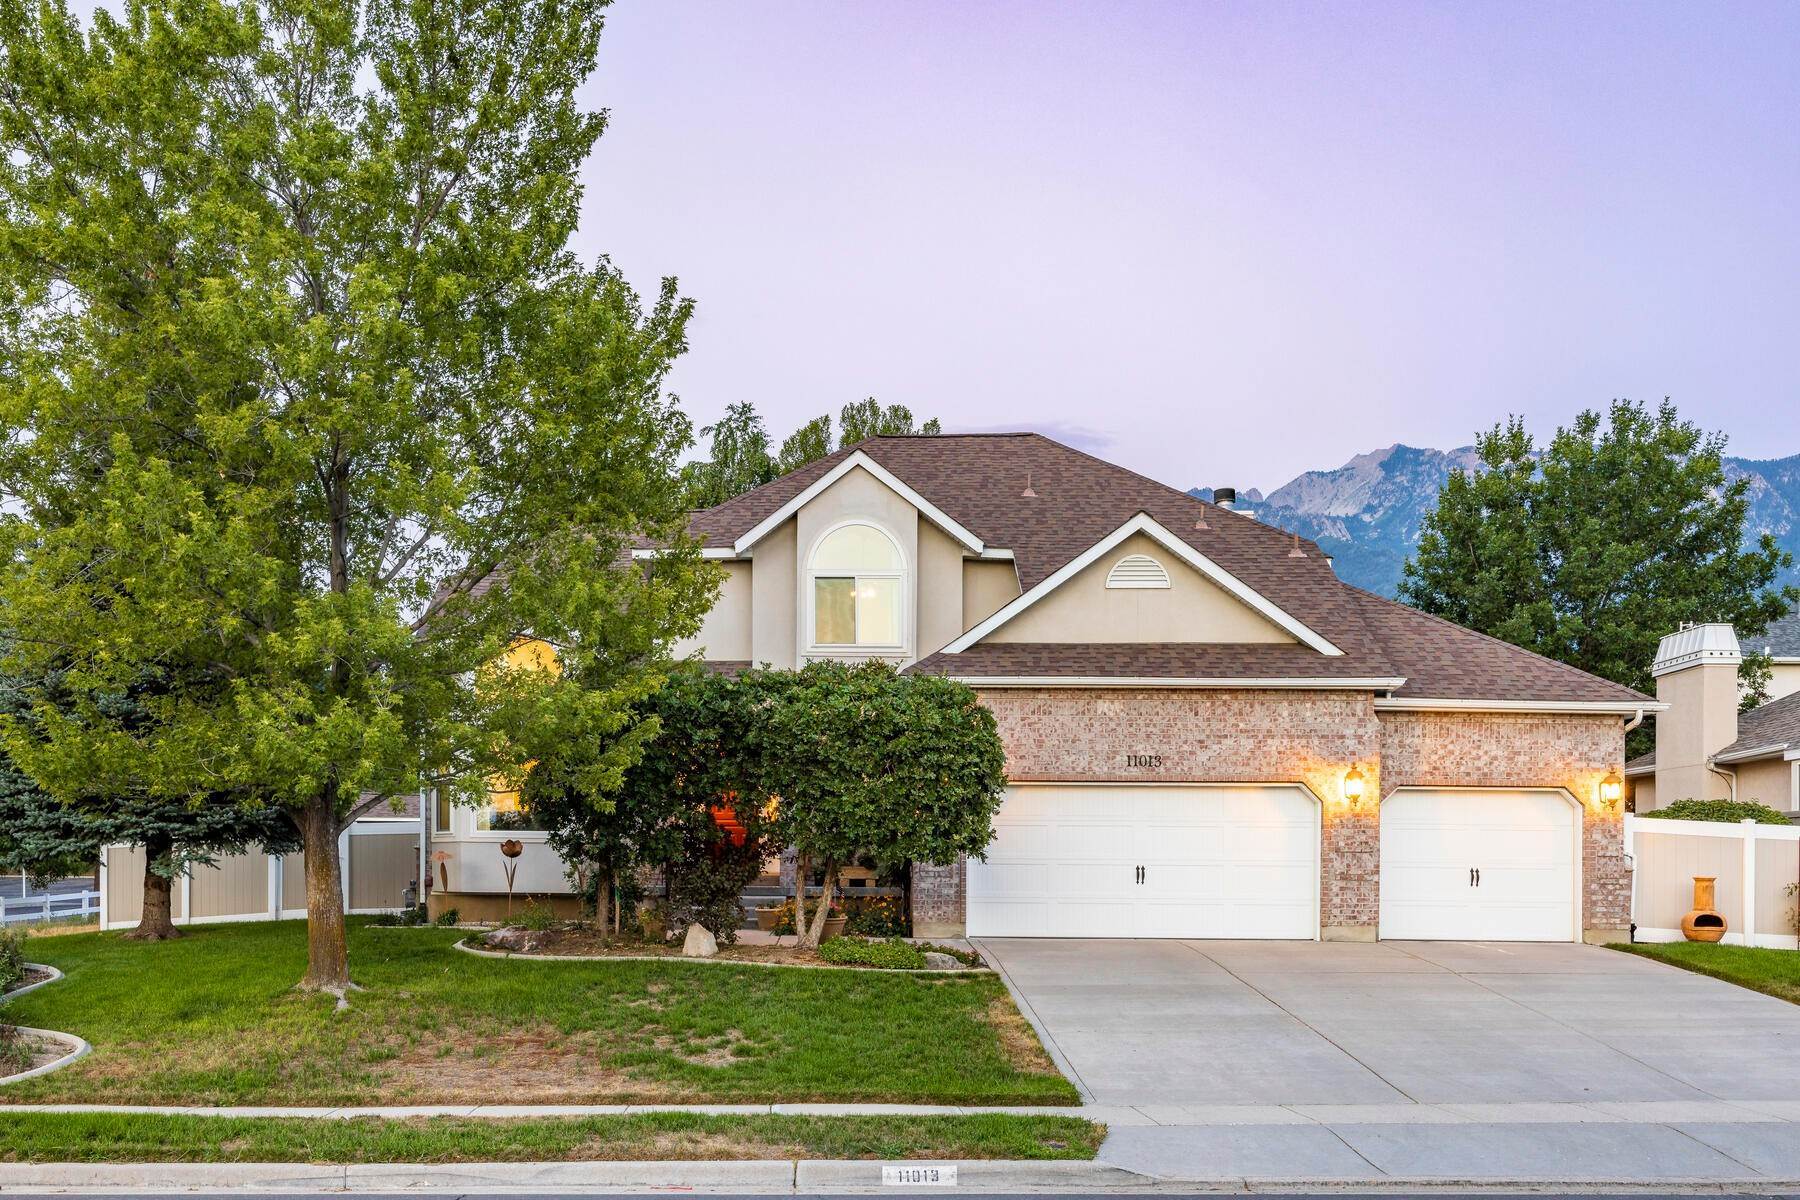 Single Family Homes for Sale at Immaculate, Meticulously Cared For Home 11013 Prescott Dr Sandy, Utah 84092 United States